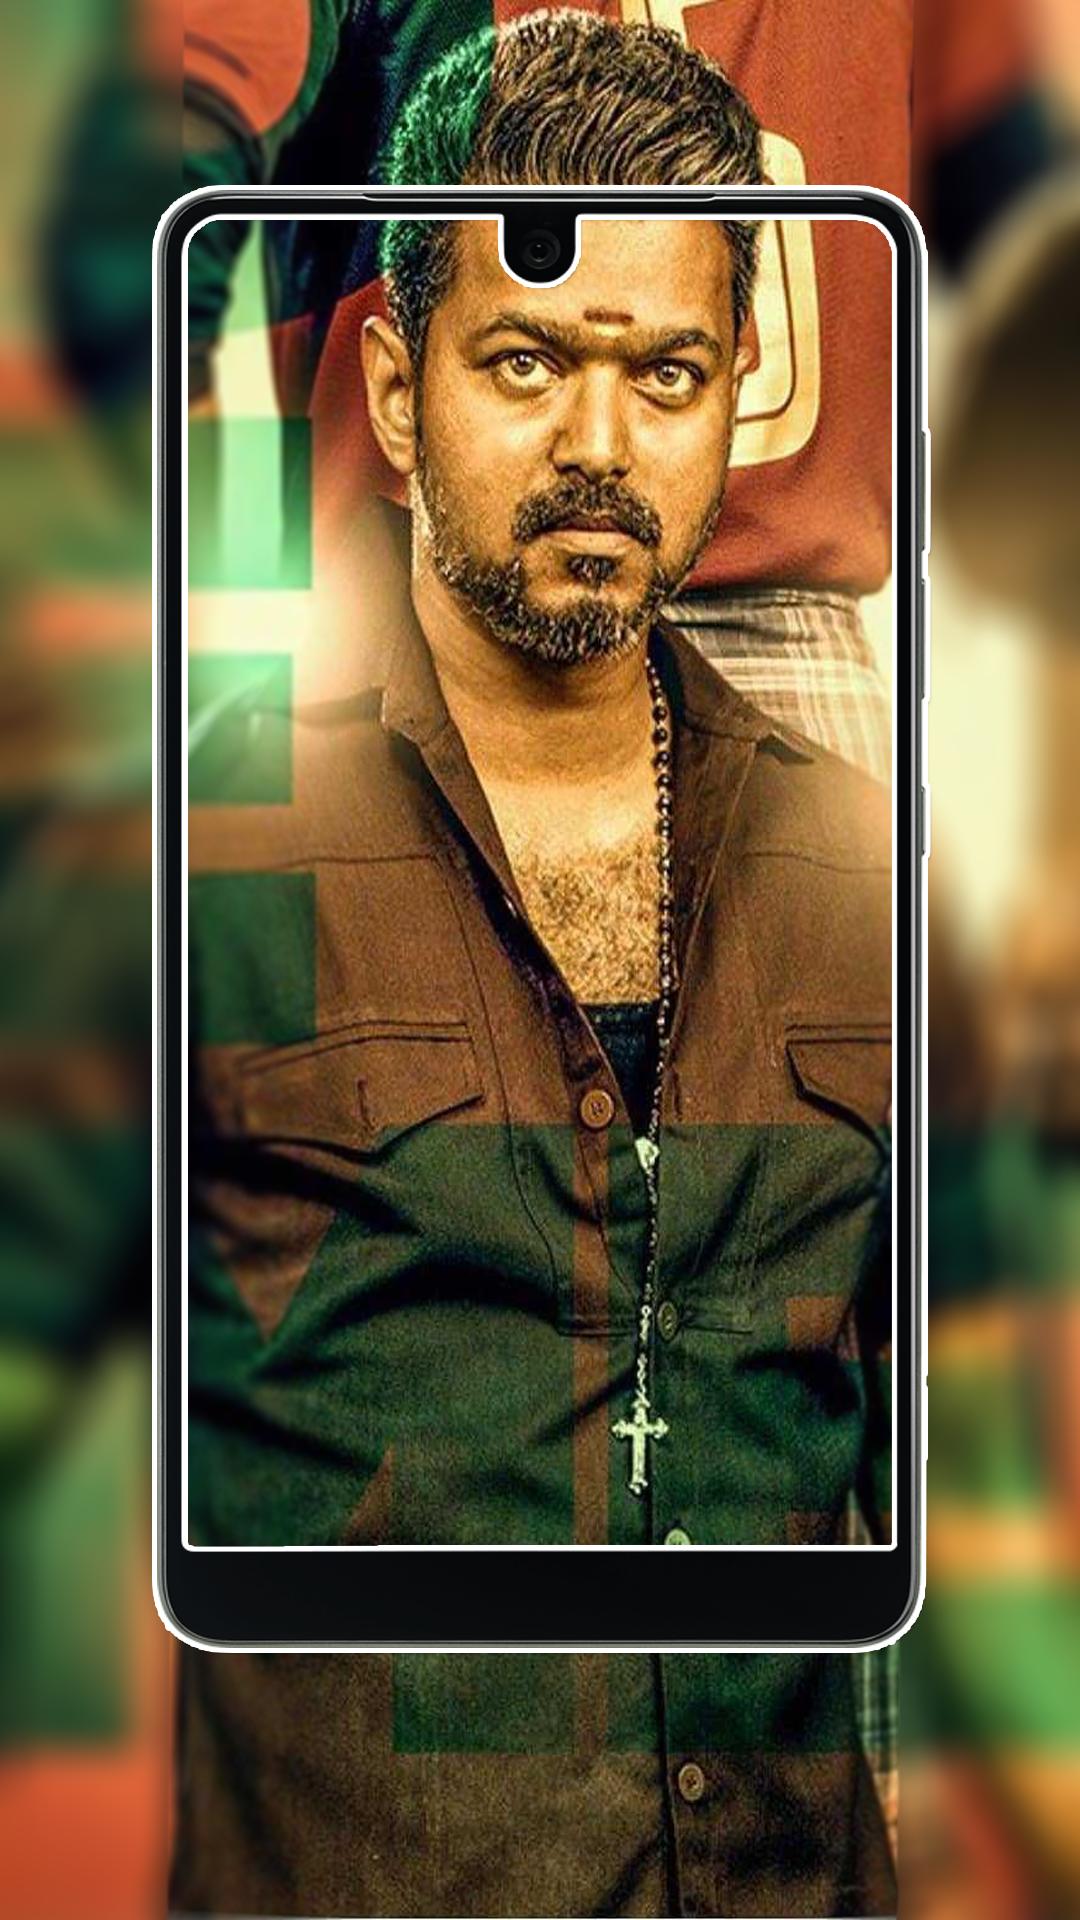 Thalapathy Vijay Hd Wallpapers 2019 For Android Apk Download